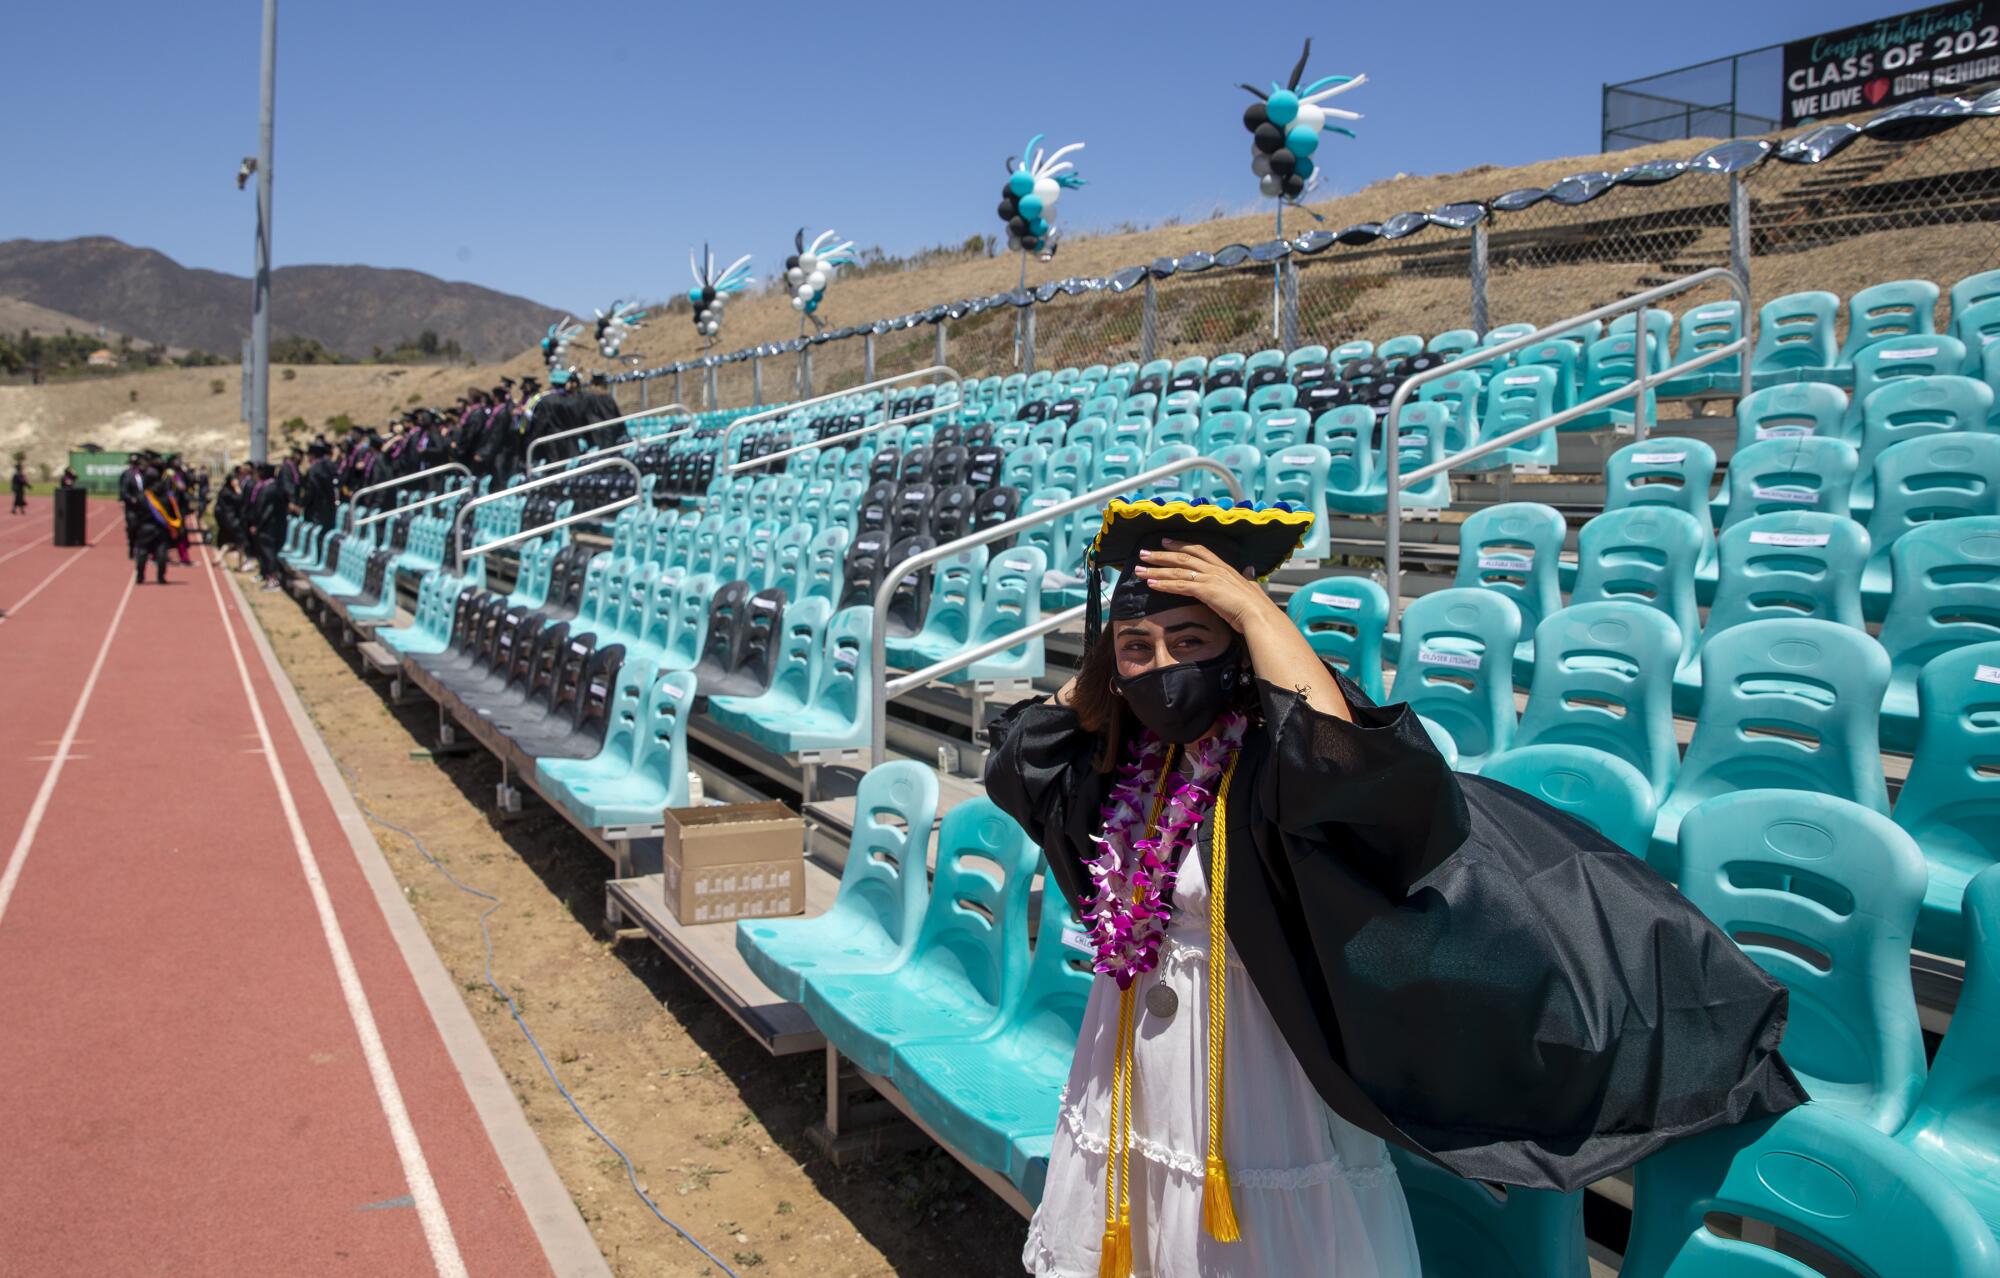 A student's graduation gown billows as she stands on a high school track.